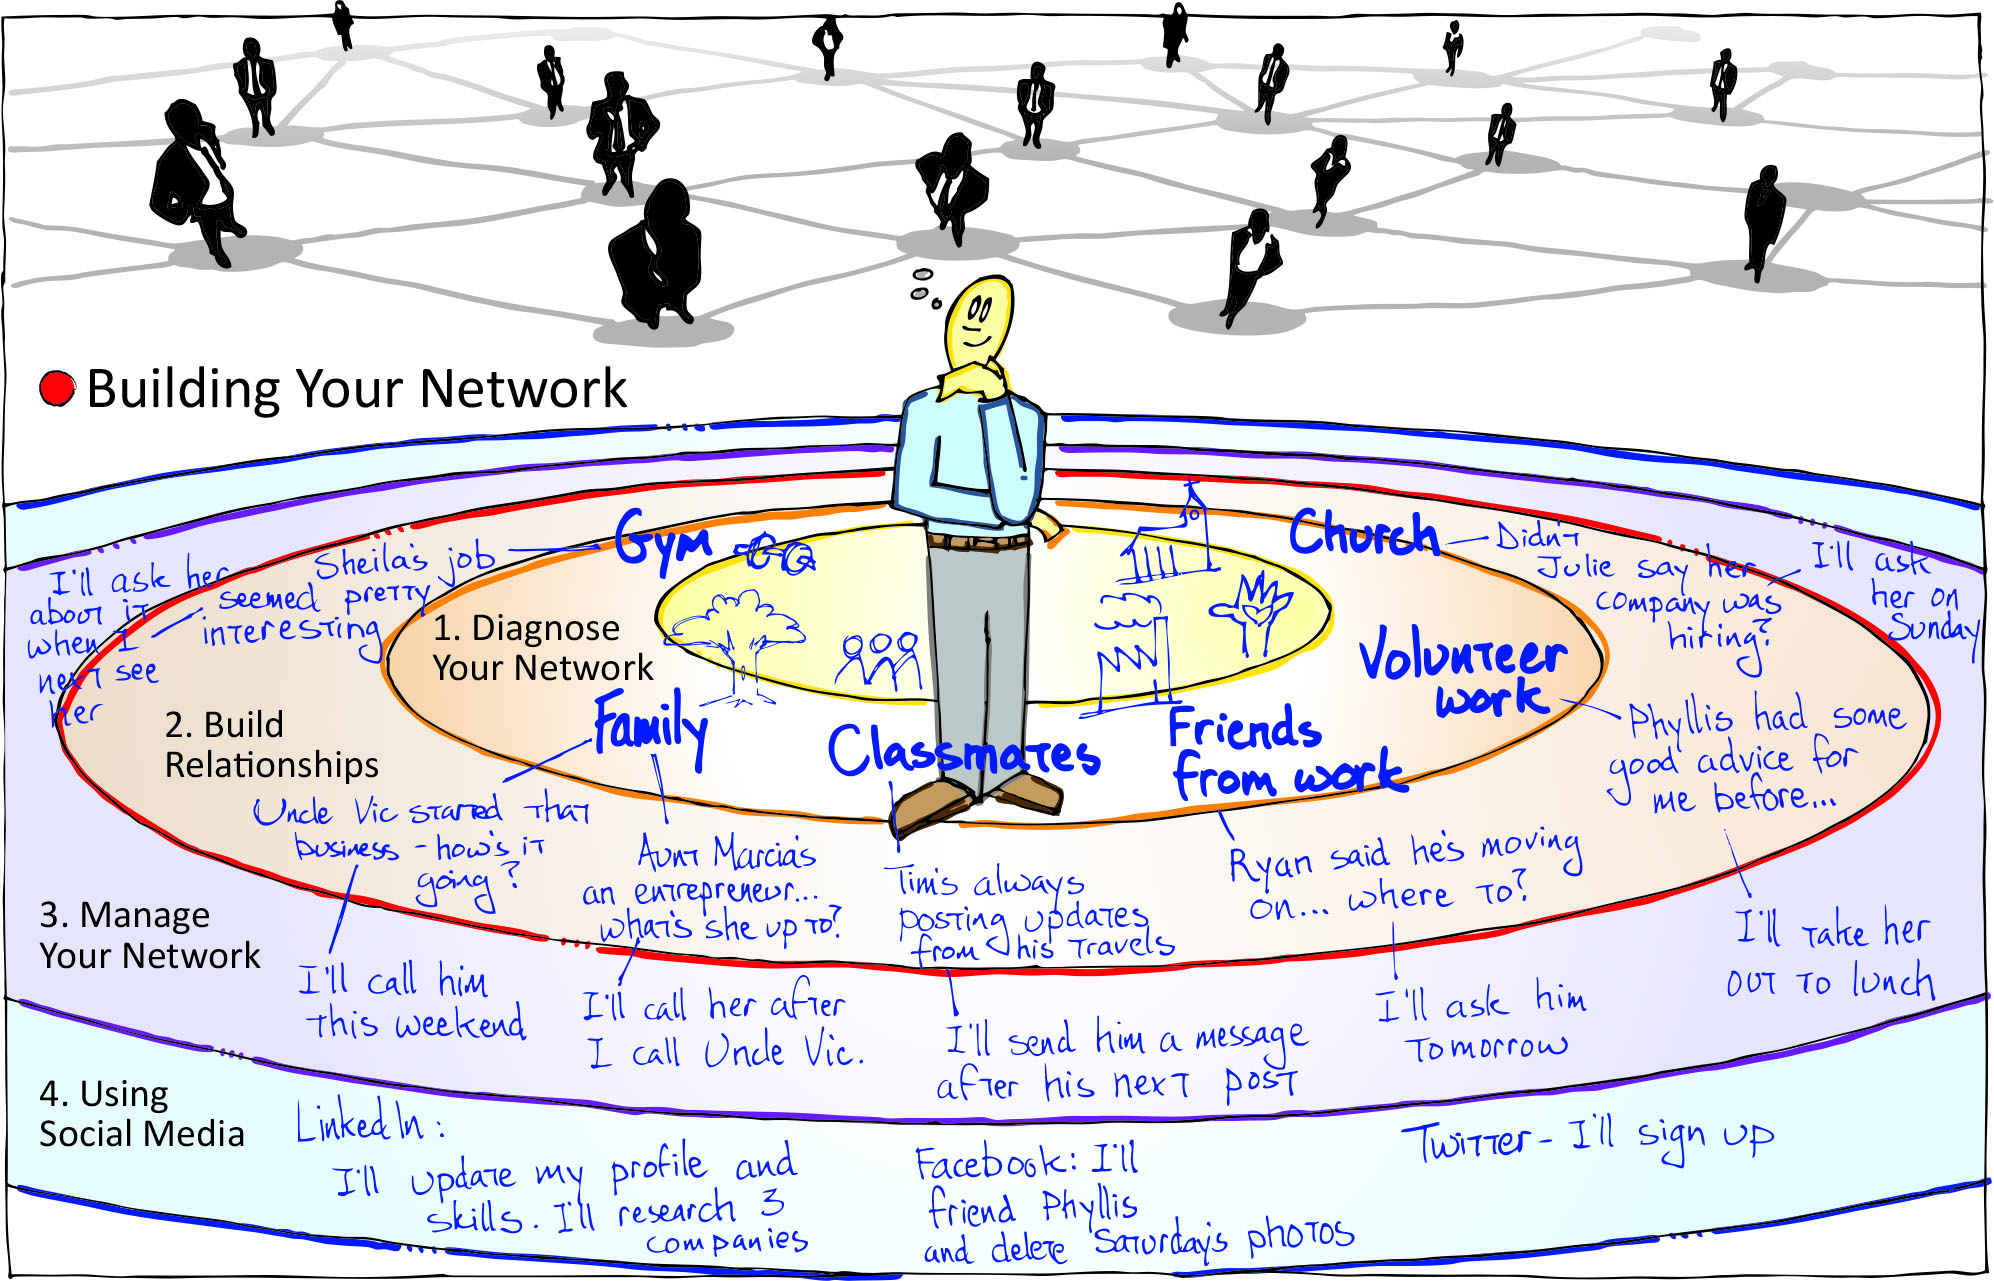 Building Your Network v01 COMPLETED EXAMPLE.jpg